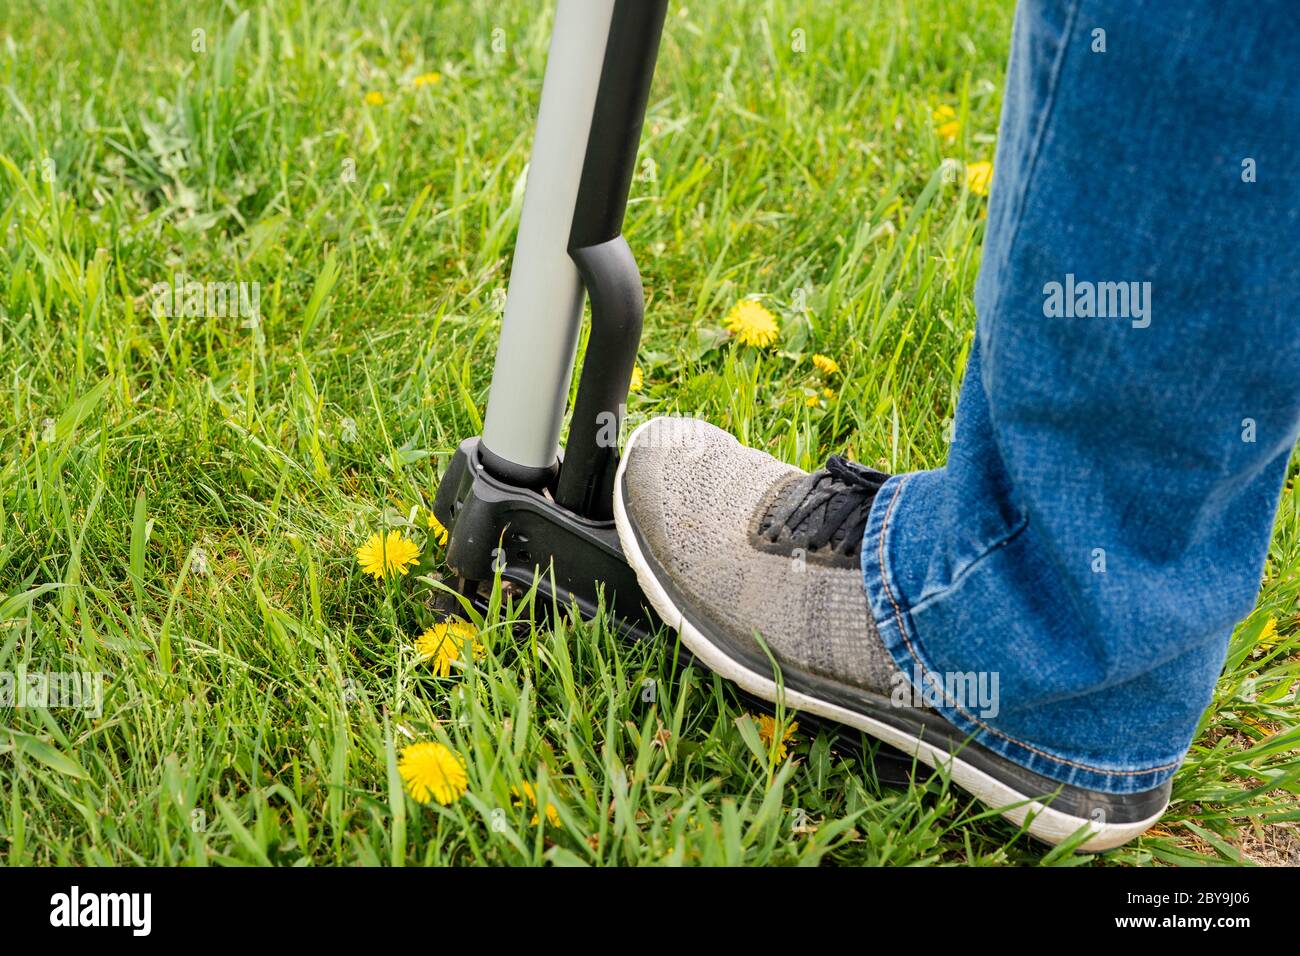 Seasonal yard work, man fighting with dandelions. Device for removing dandelion weeds by pulling the tap root. Weed control. Dandelion removal and wee Stock Photo